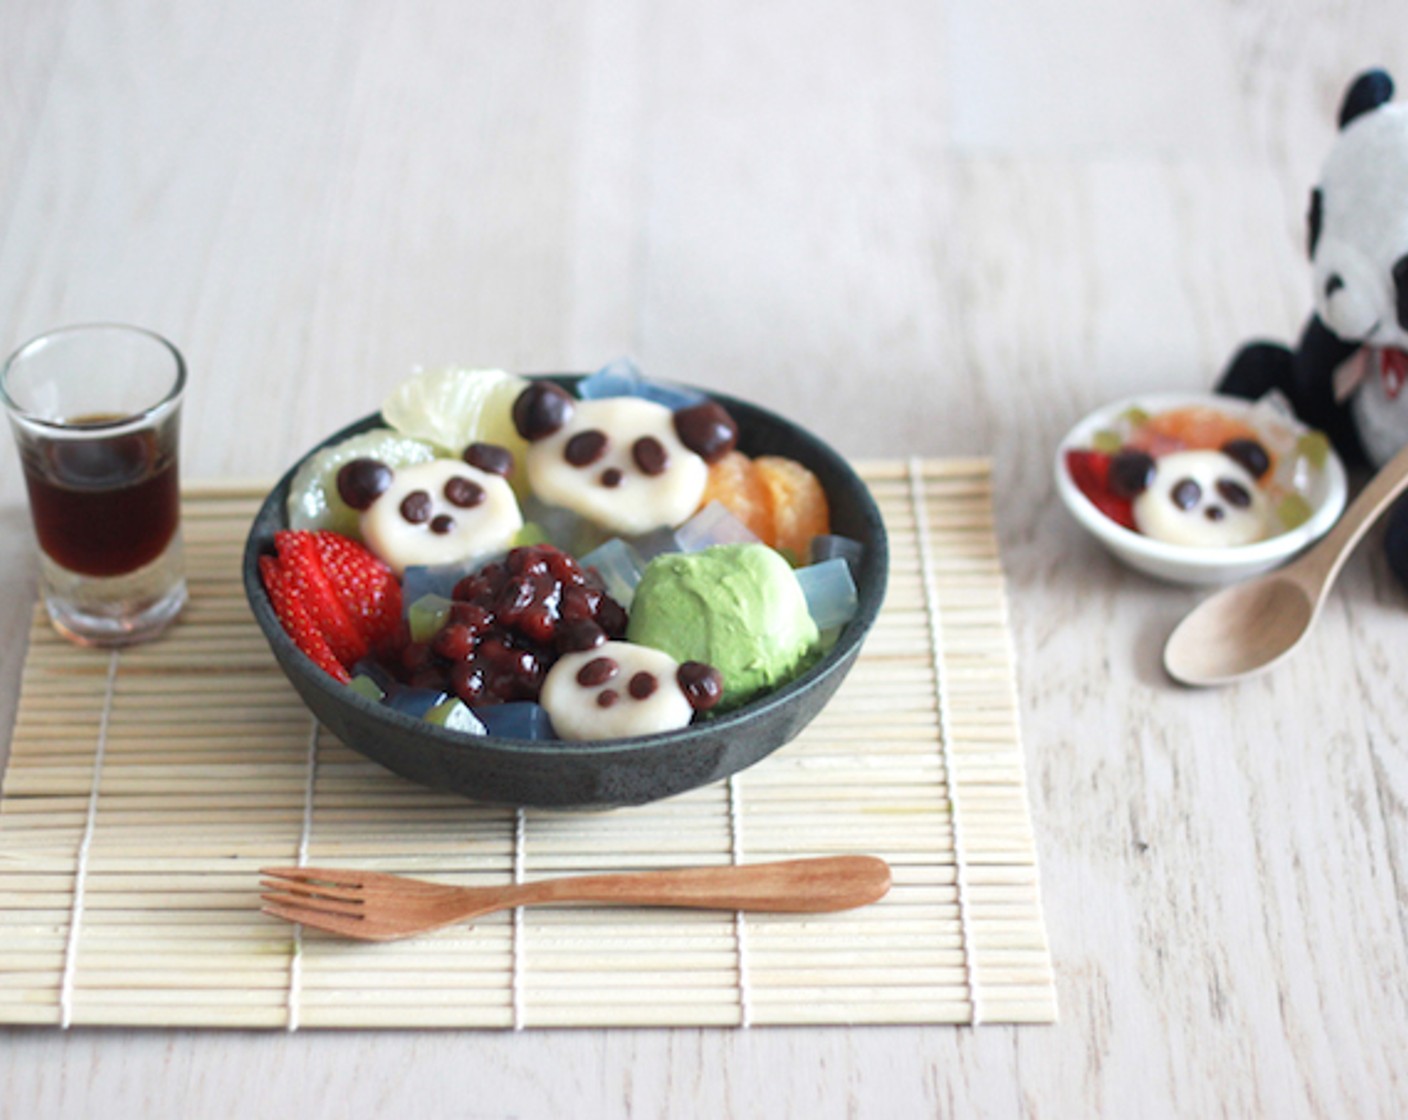 step 12 Decorate with Ice Cream (1 scoop), Fresh Strawberries (3), 3 orange wedges, and Red Bean Paste (3 Tbsp) to finish. Set kuromitsu on a side of the plate and you’re DONE! Now you’ve made a beautiful Panda Shiratama Anmitsu!